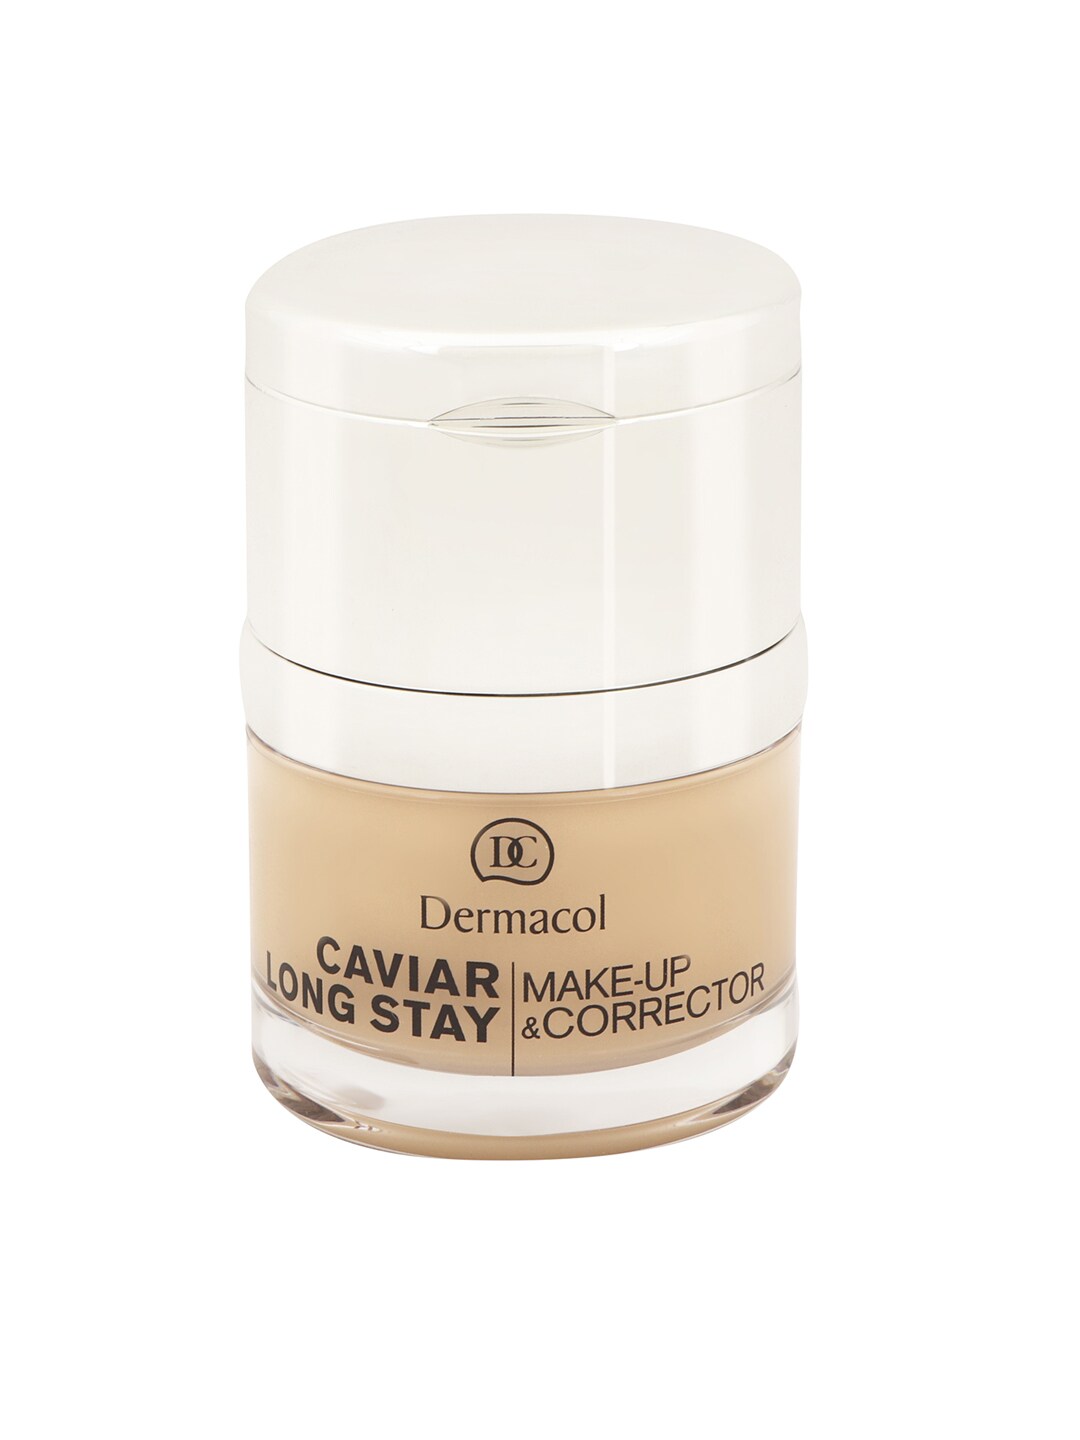 Dermacol 1249A Caviar Long Stay Make-up and Corrector-2 fair Foundation Price in India